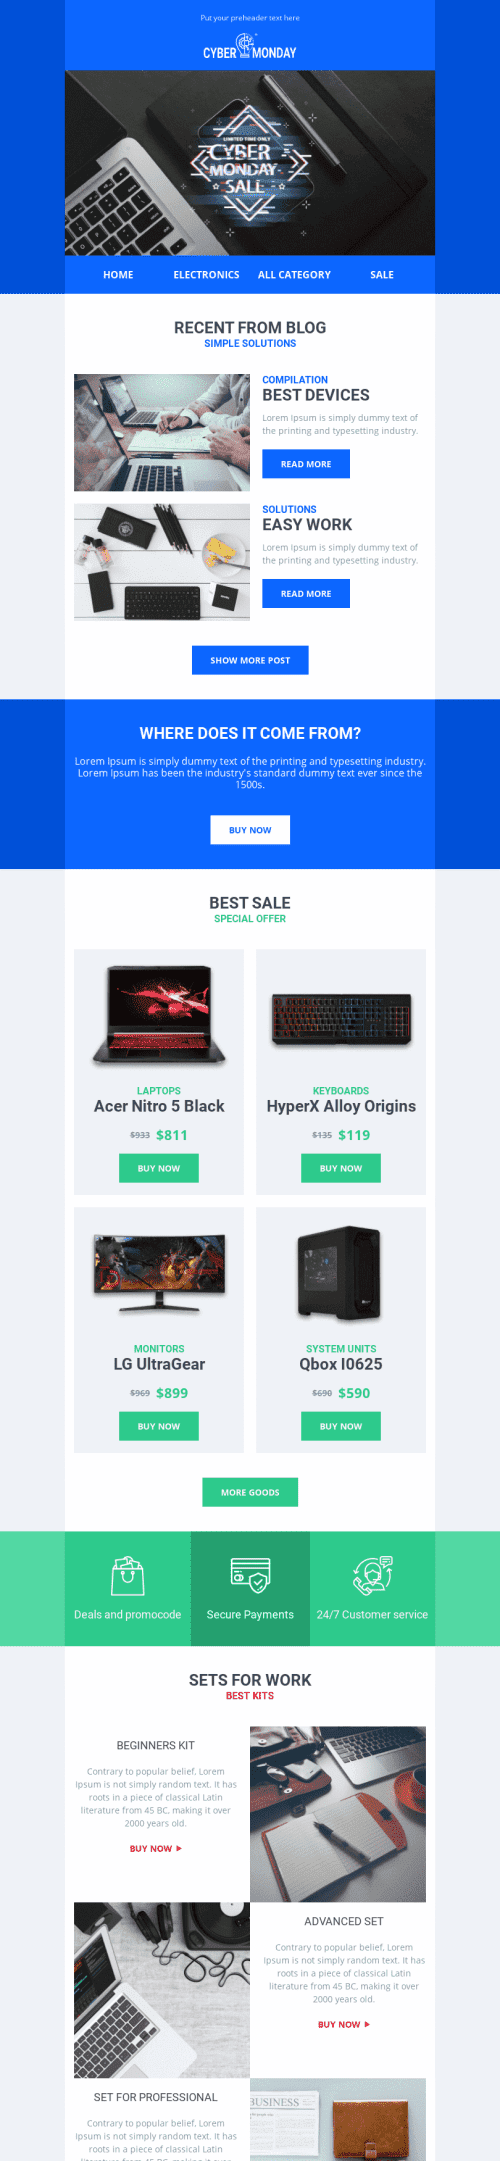 Promo Email Template «Gizmos» for Gadgets industry desktop view